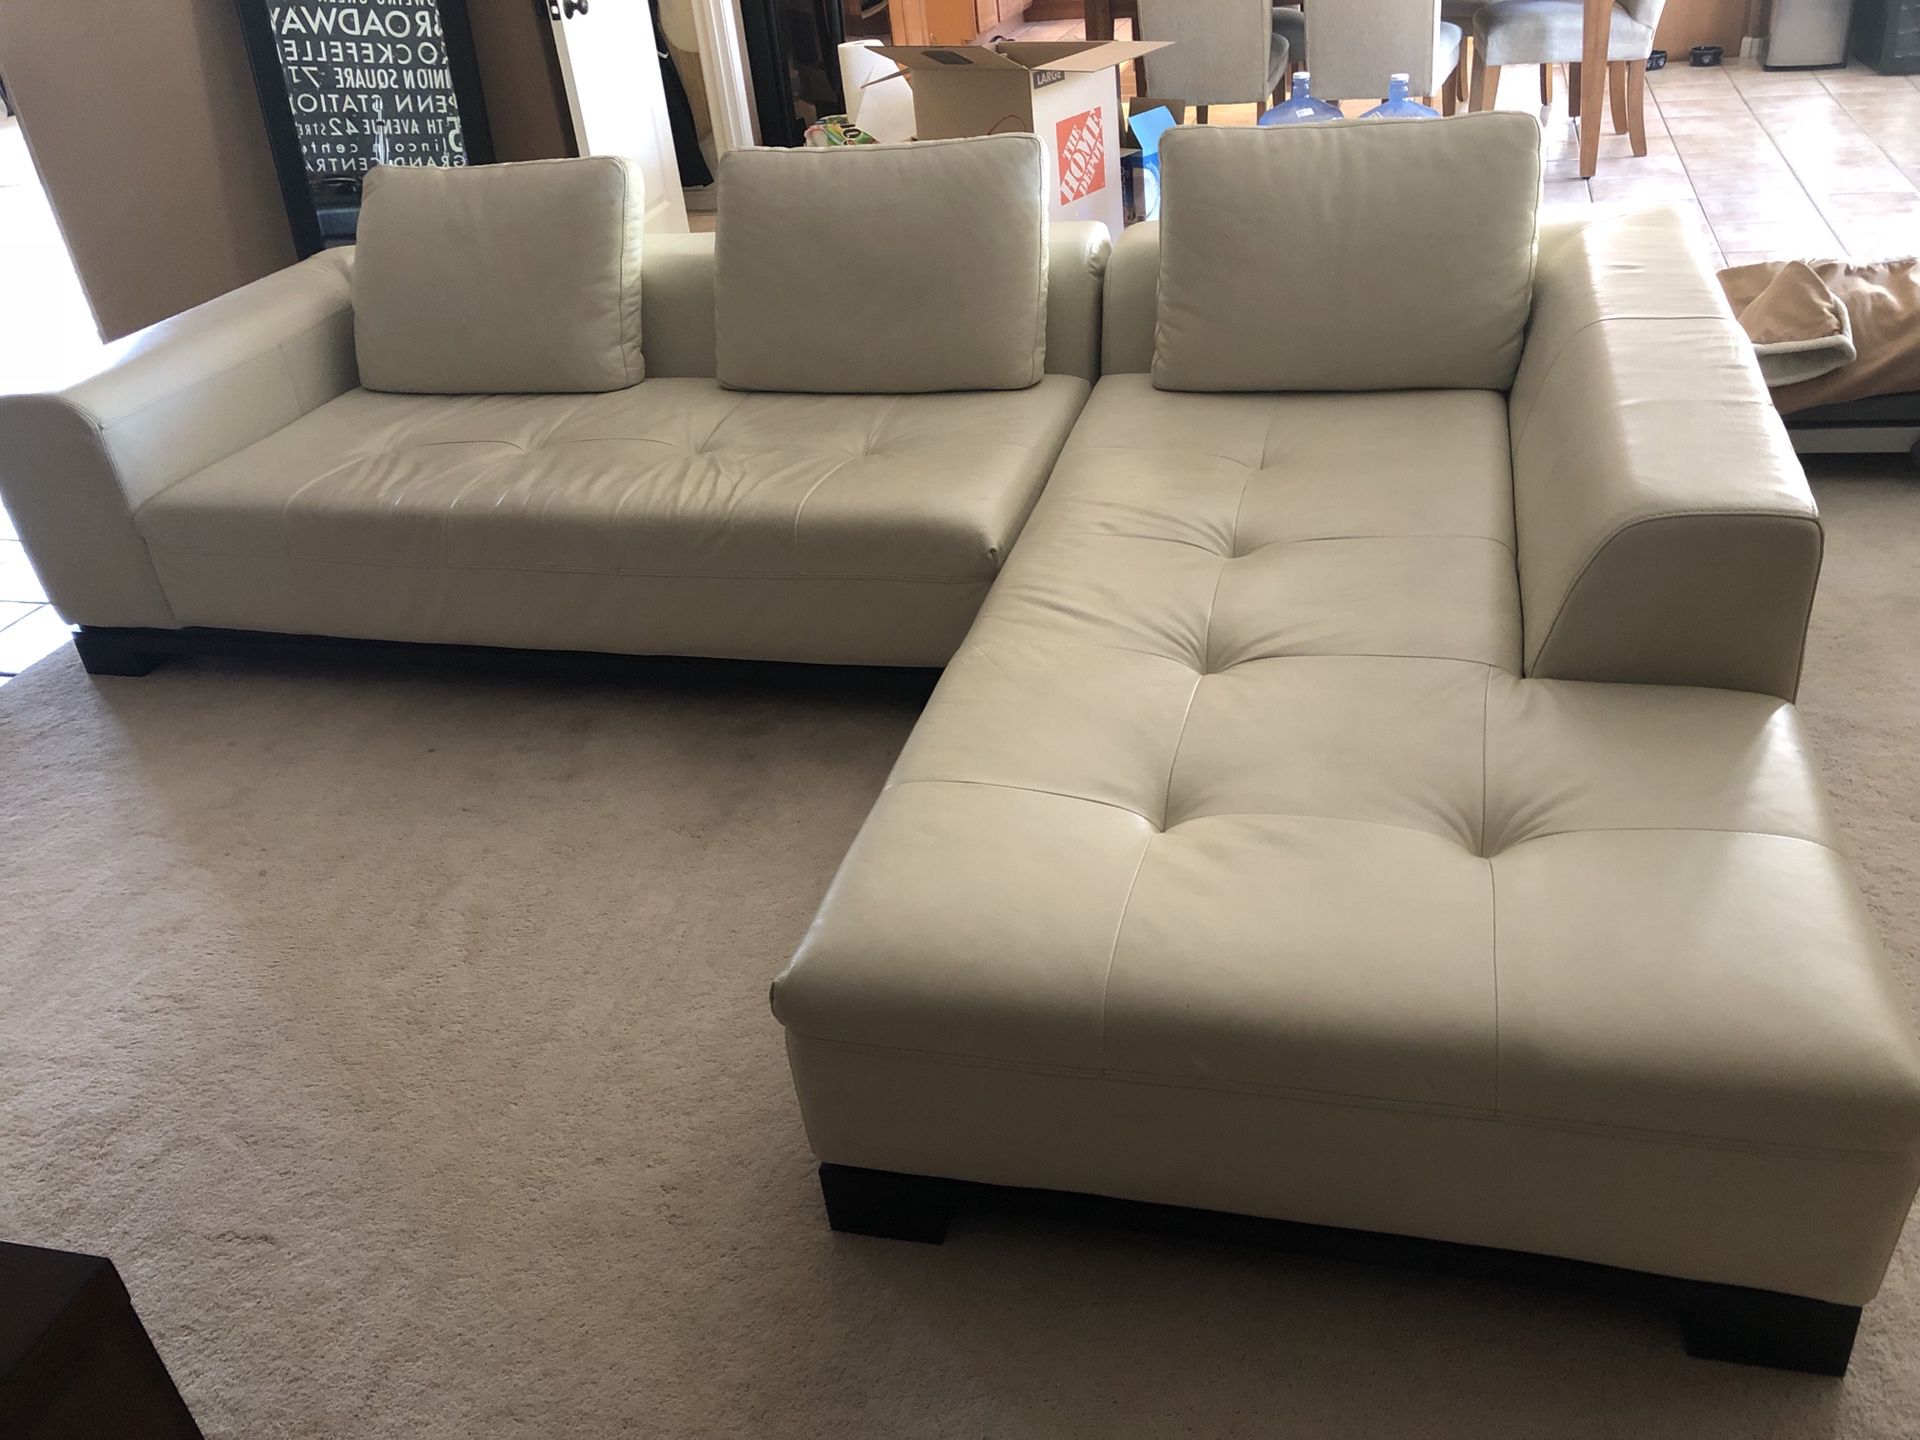 Z GALLERIE OFF WHITE LEATHER SOFA CHAISE 2 PIECE SECTIONAL COUCH